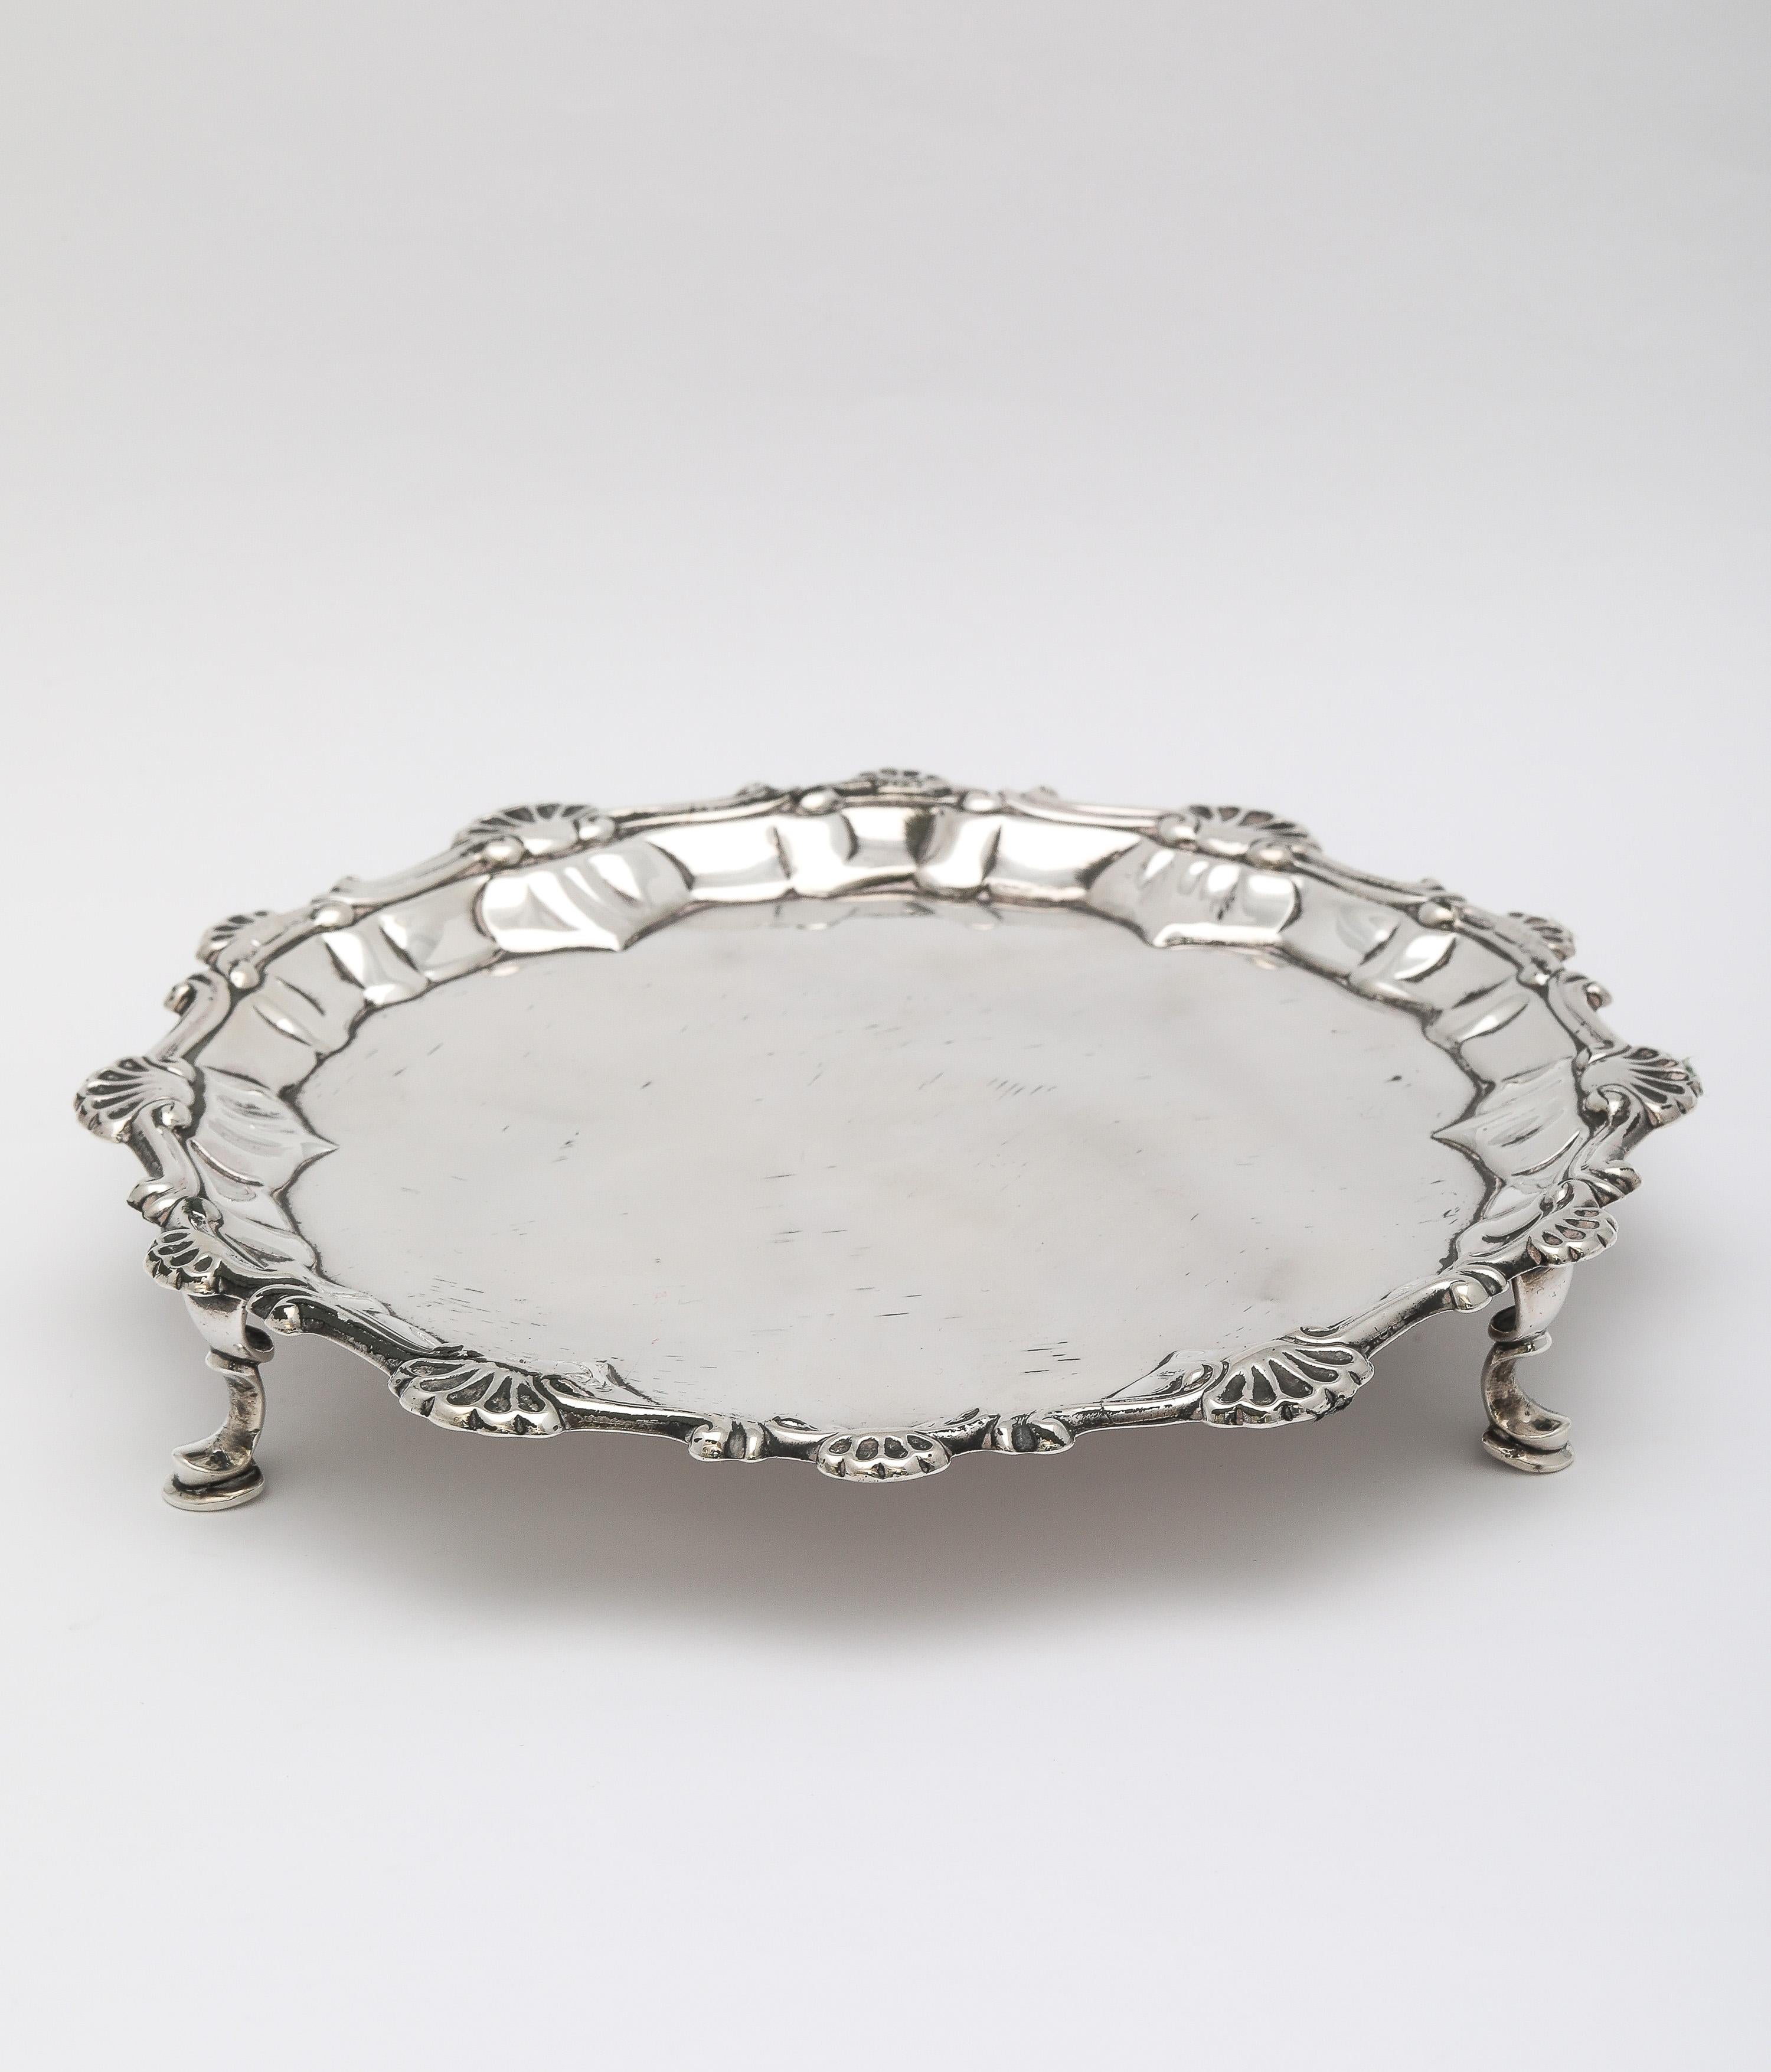 Sterling silver, George III Period, hoof-footed salver, London, England, year-hallmarked for 1765, Ebenezer Coker - maker. Scroll and shell designed border.  Measures almost 6 3/4 inches in diameter x 1 inch high. Weighs 6.280 troy ounces. There is